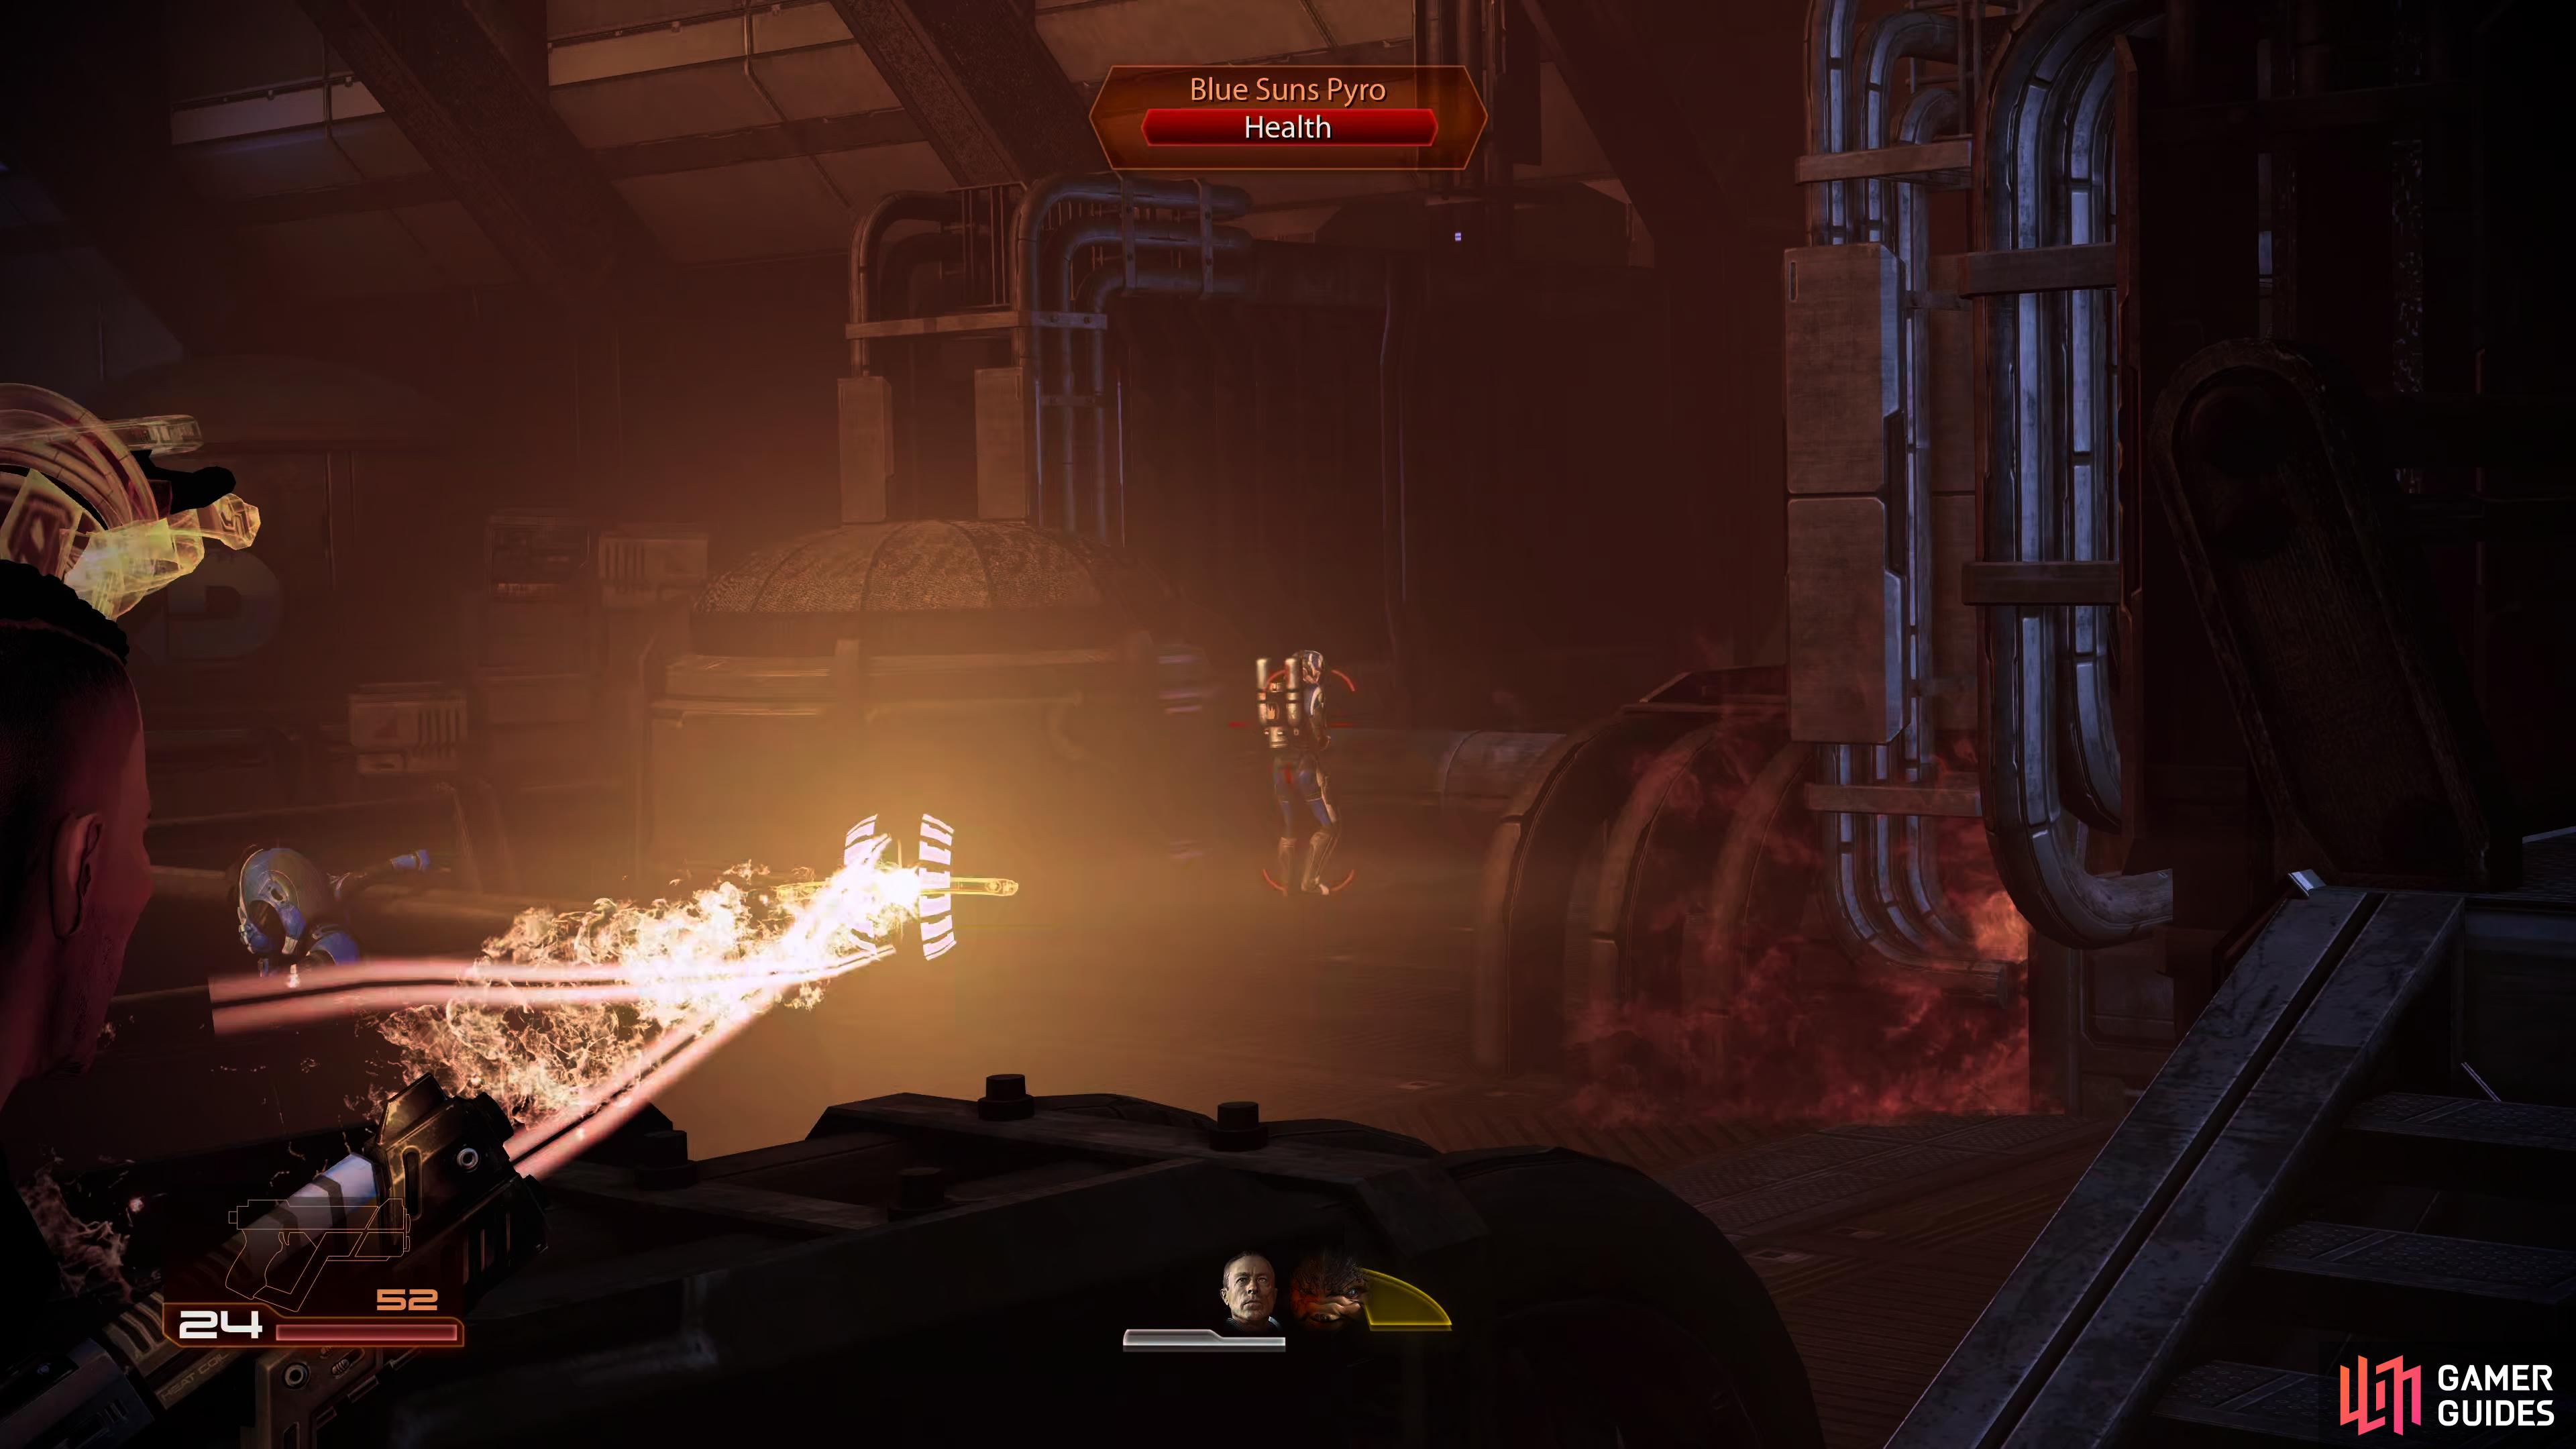 Incinerate is great against unprotected Pyro's, causing them to explode.